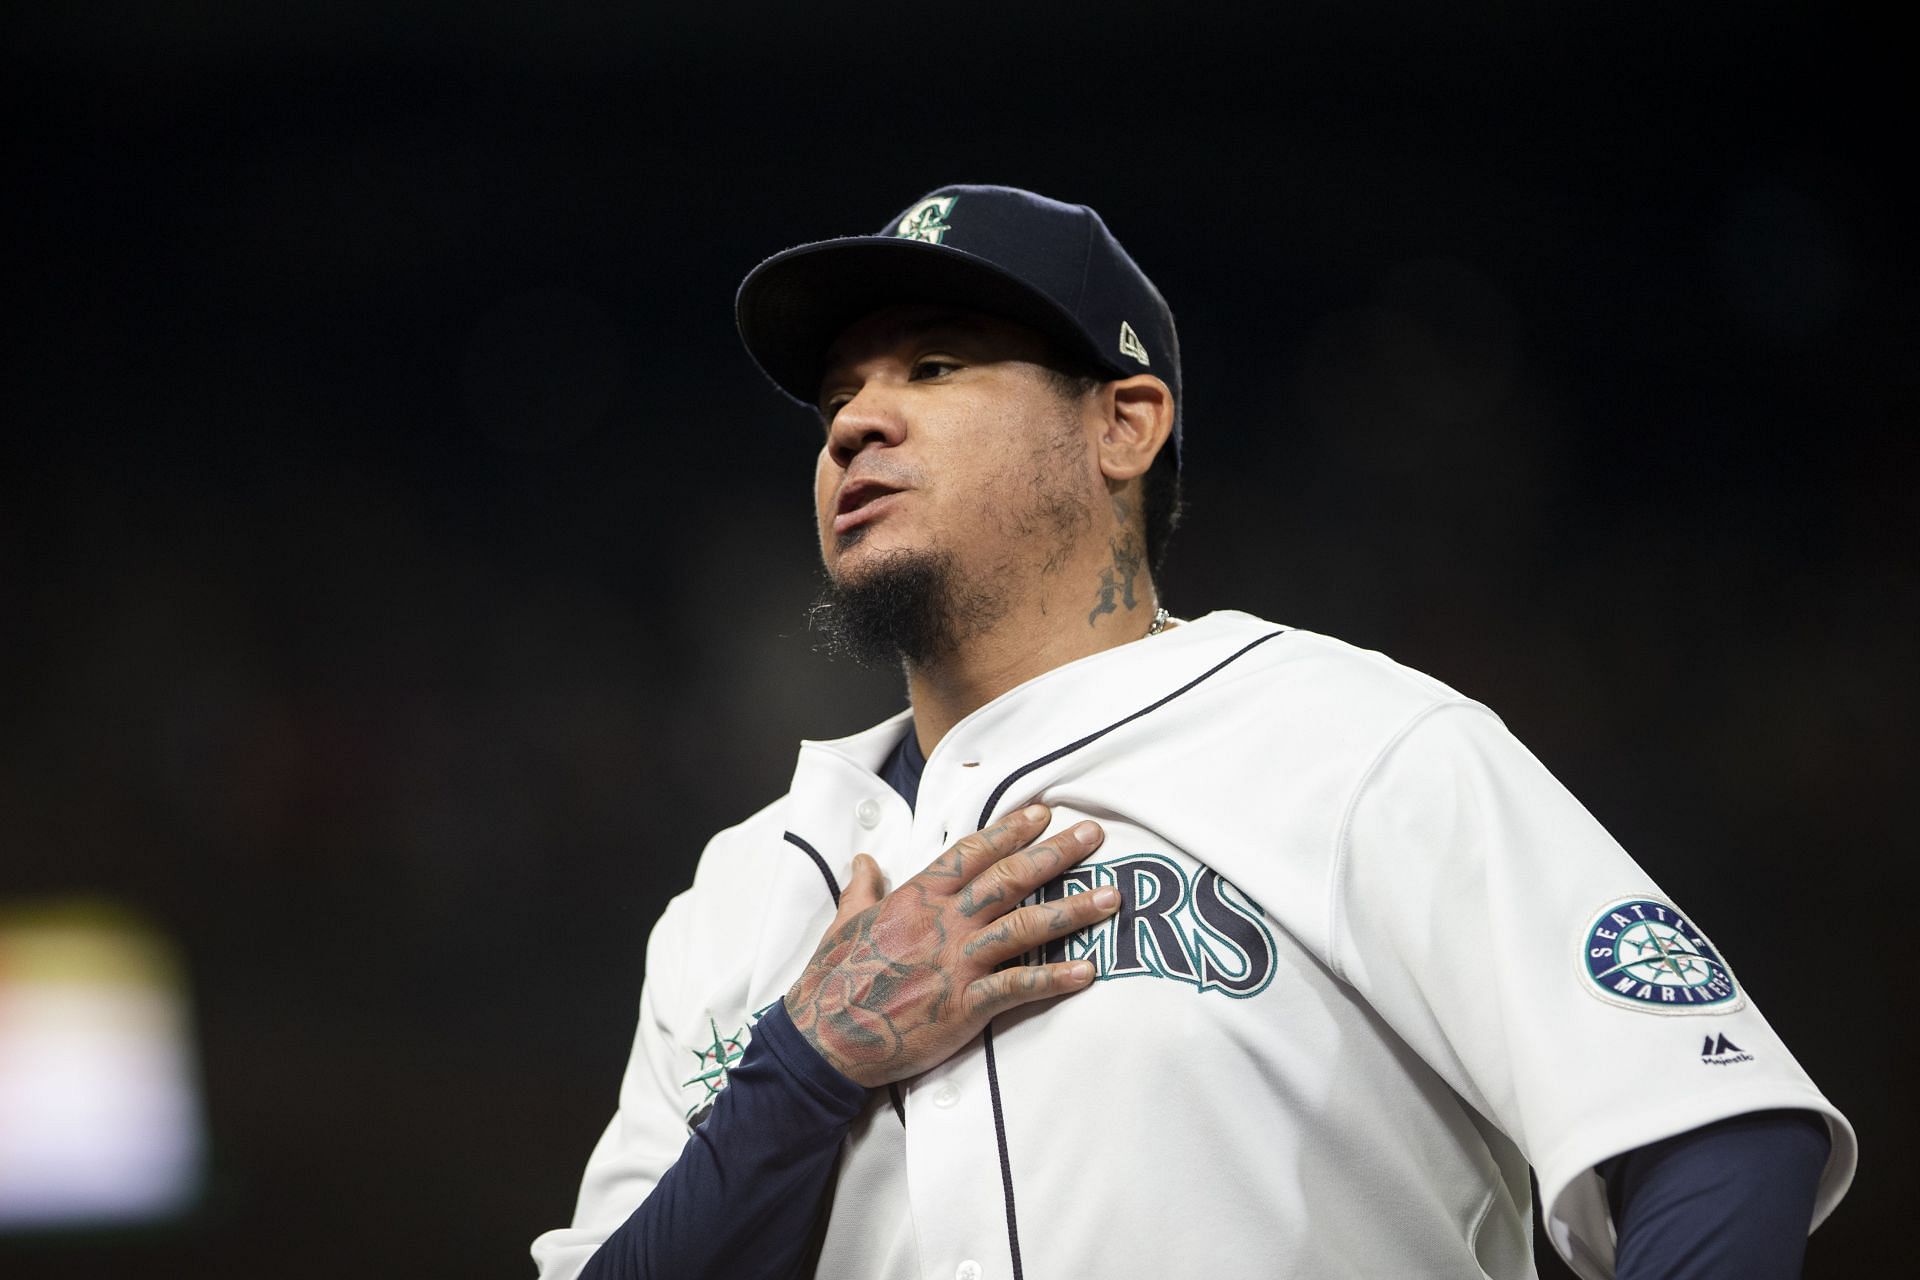 Former pitcher Félix Hernández will join the Mariners' Hall of